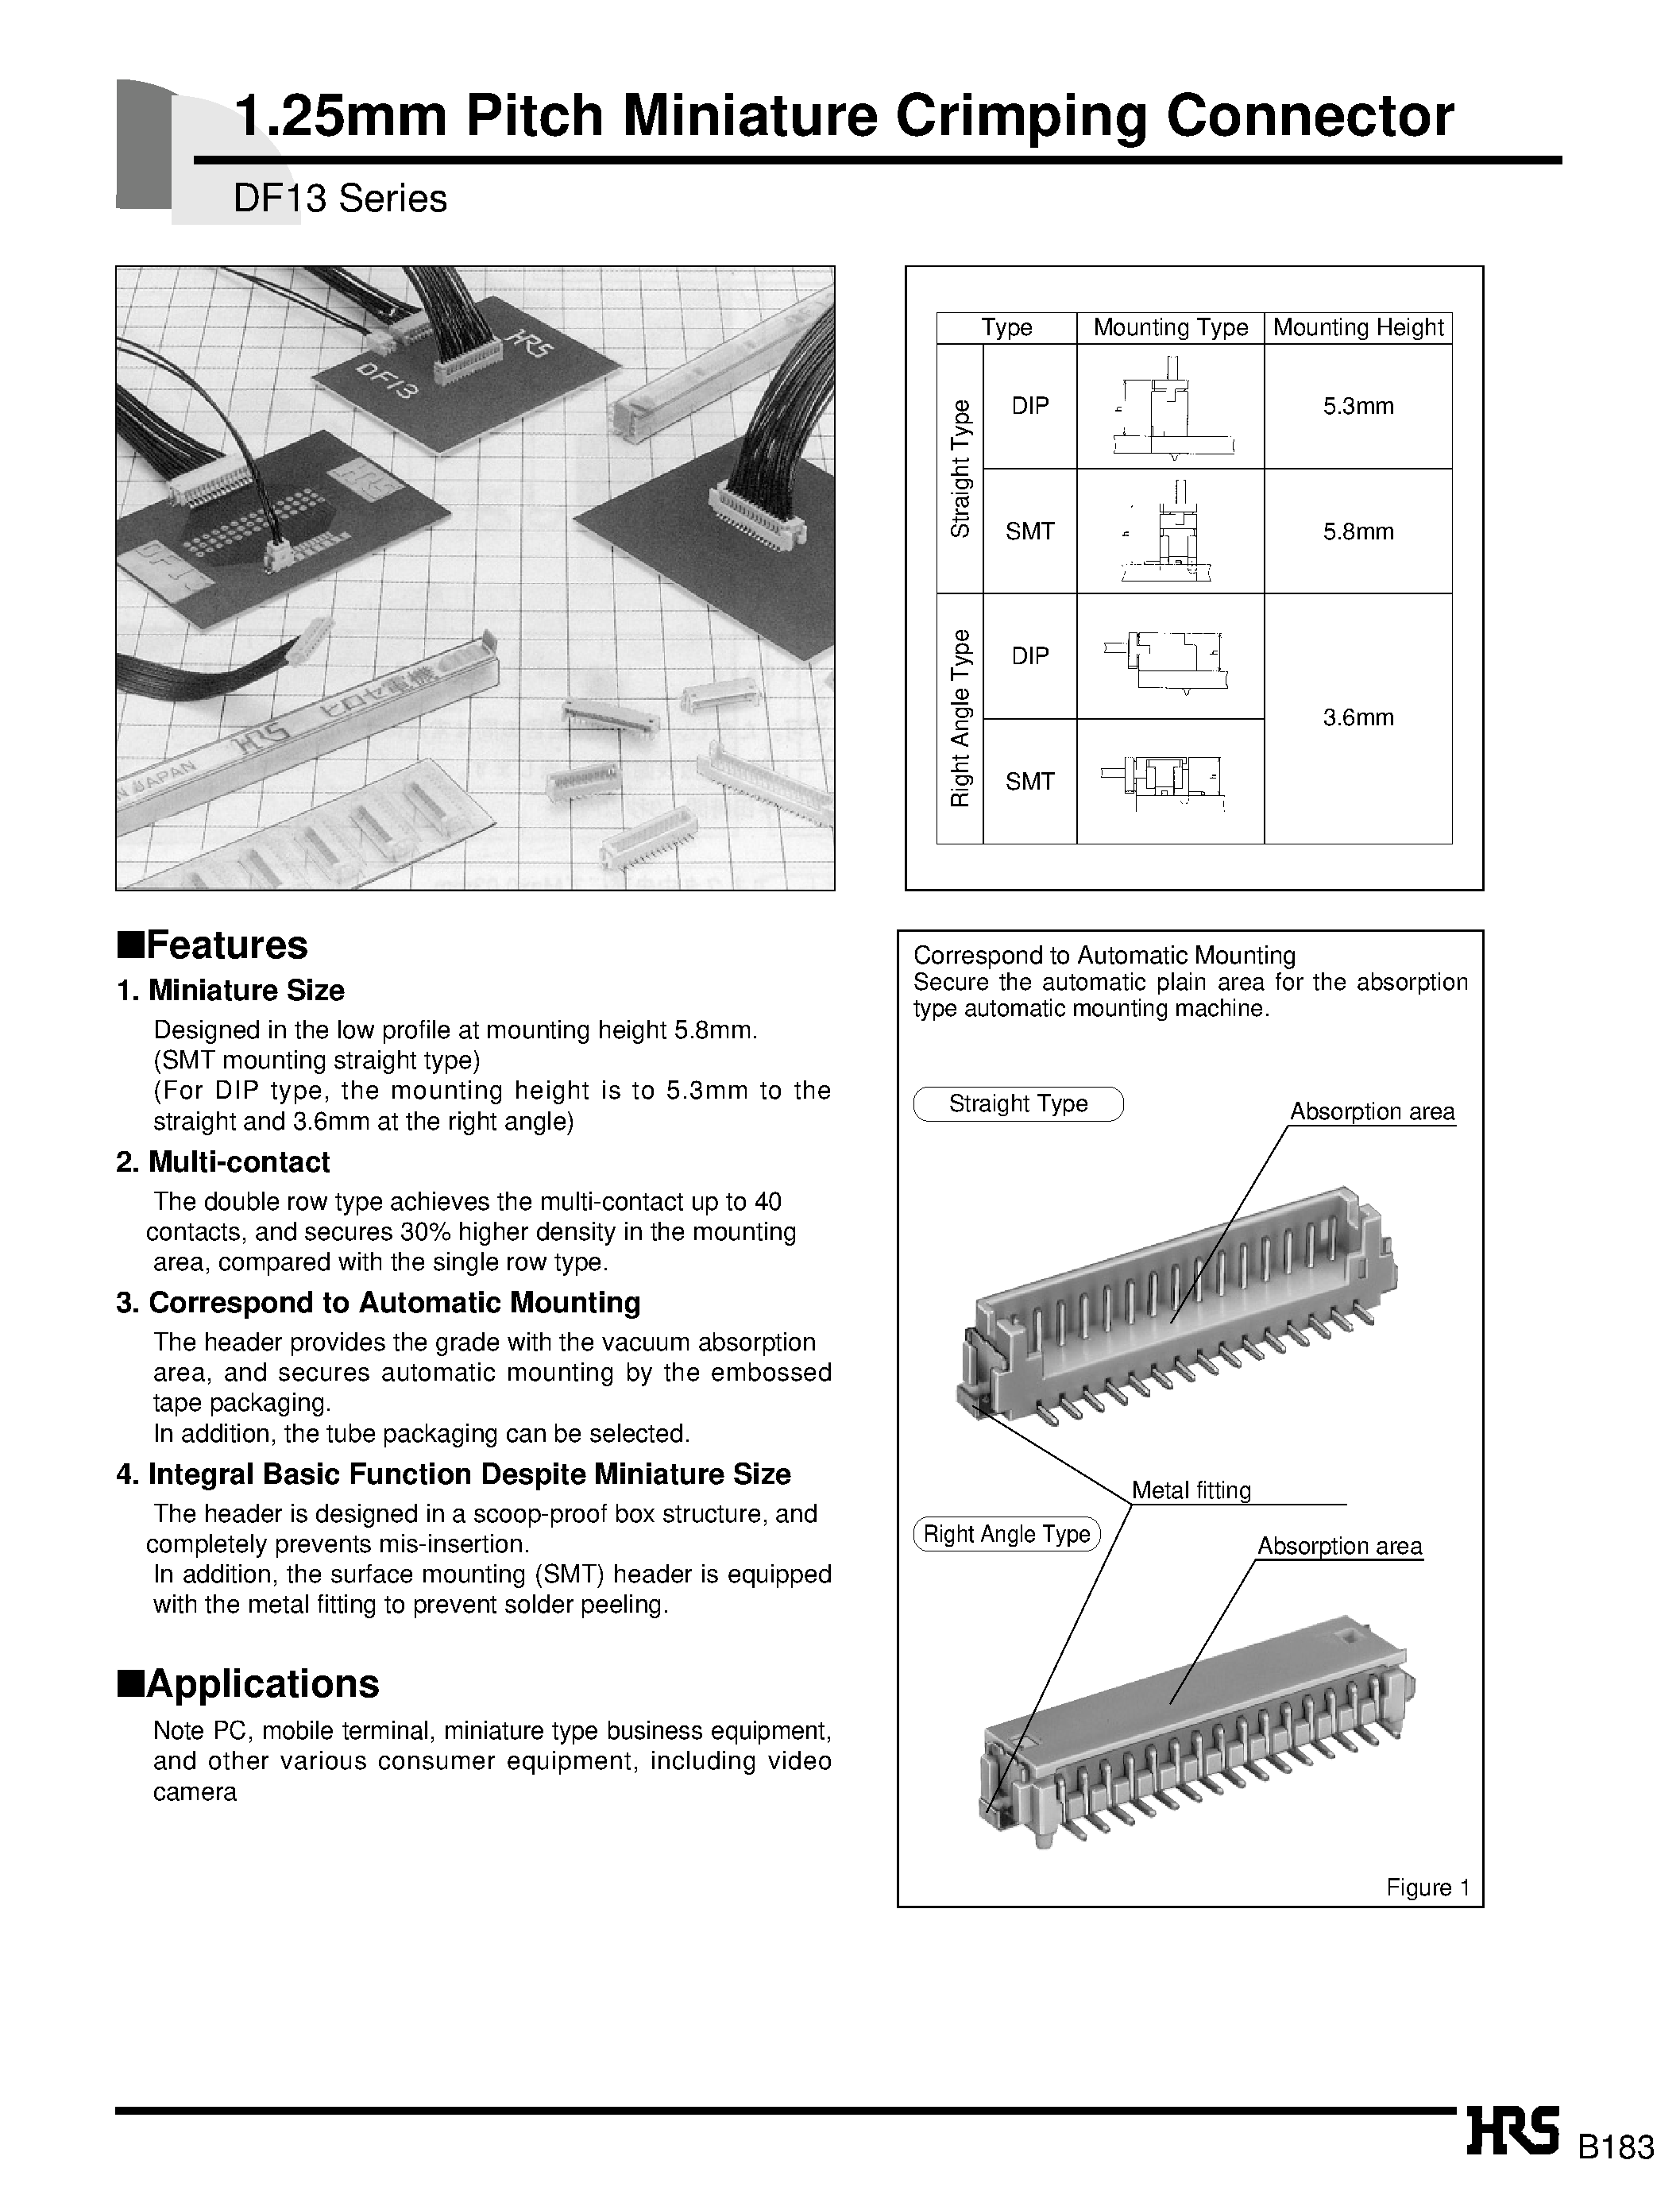 Datasheet DF13-11P-1.25C - 1.25mm Pitch Miniature Crimping Connector page 1